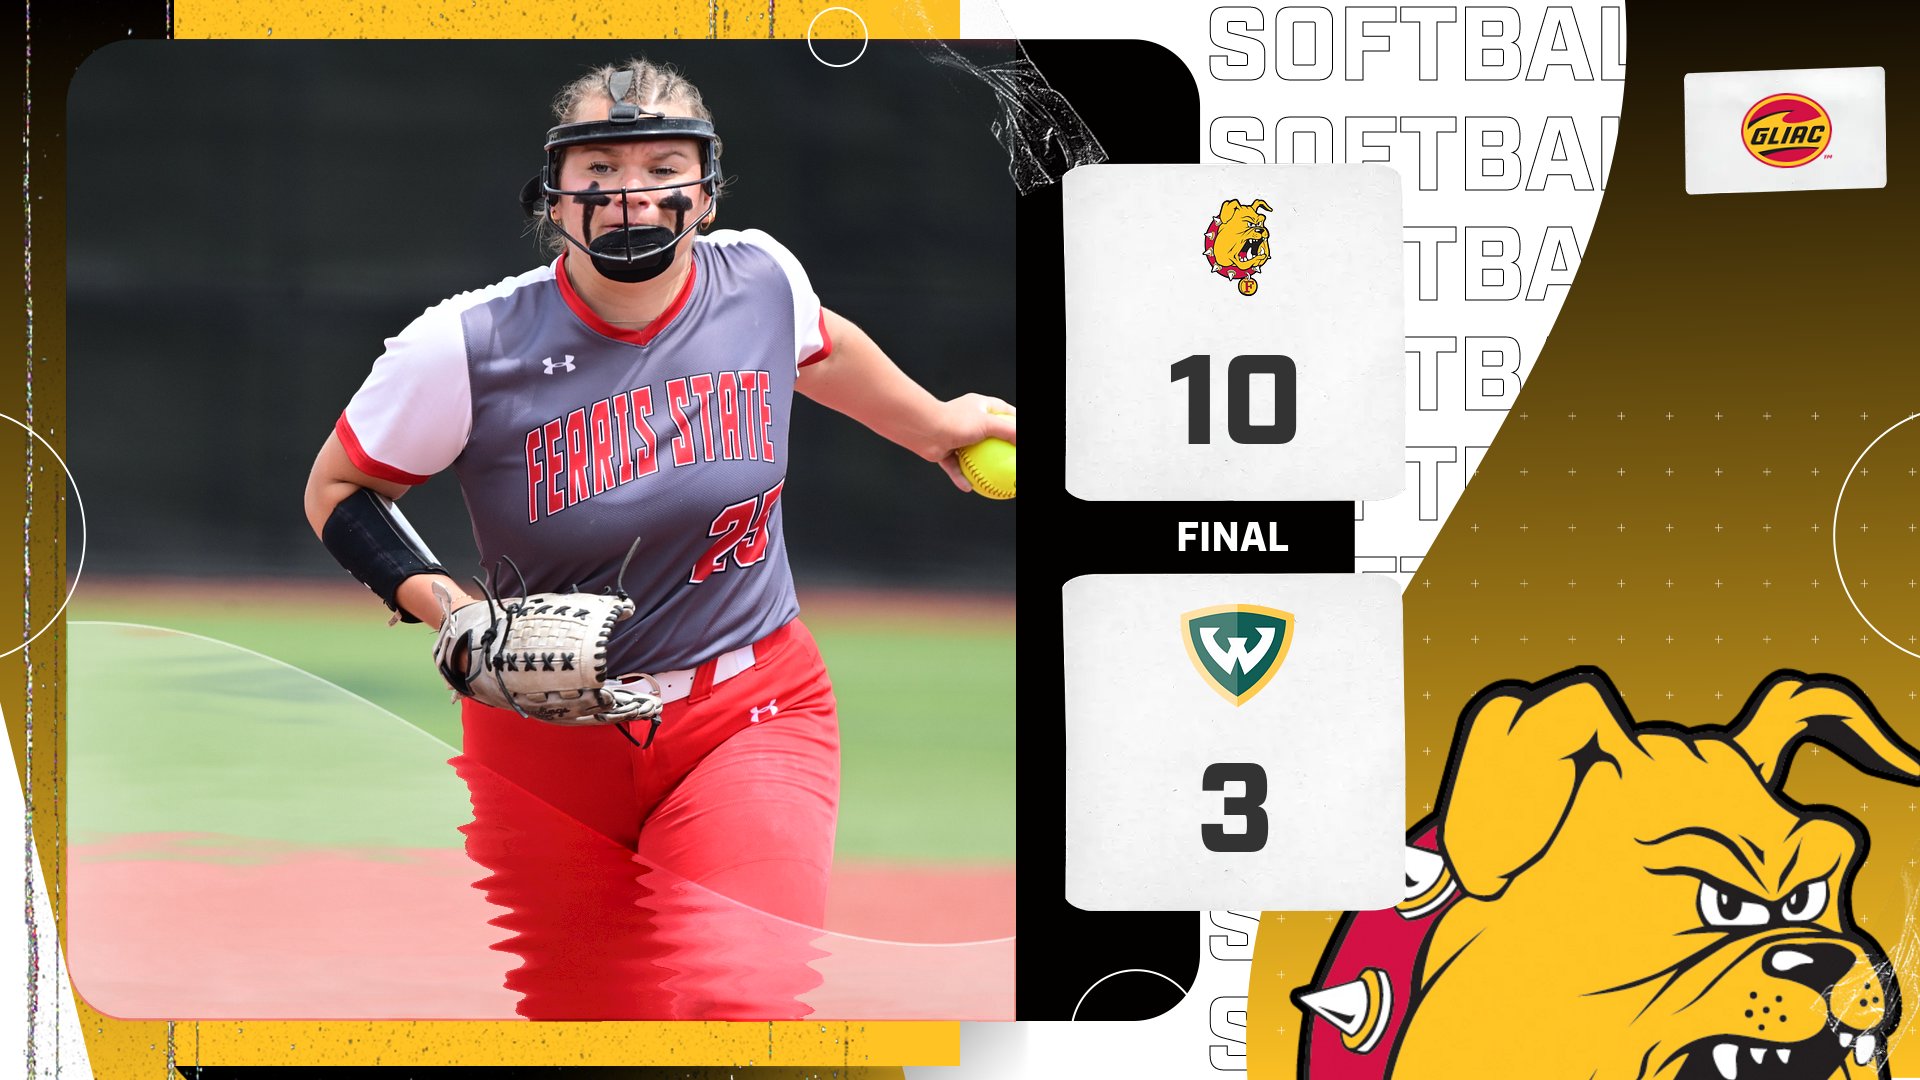 Bulldog Softball Advances To Day Two Play With First-Round Win At GLIAC Tournament